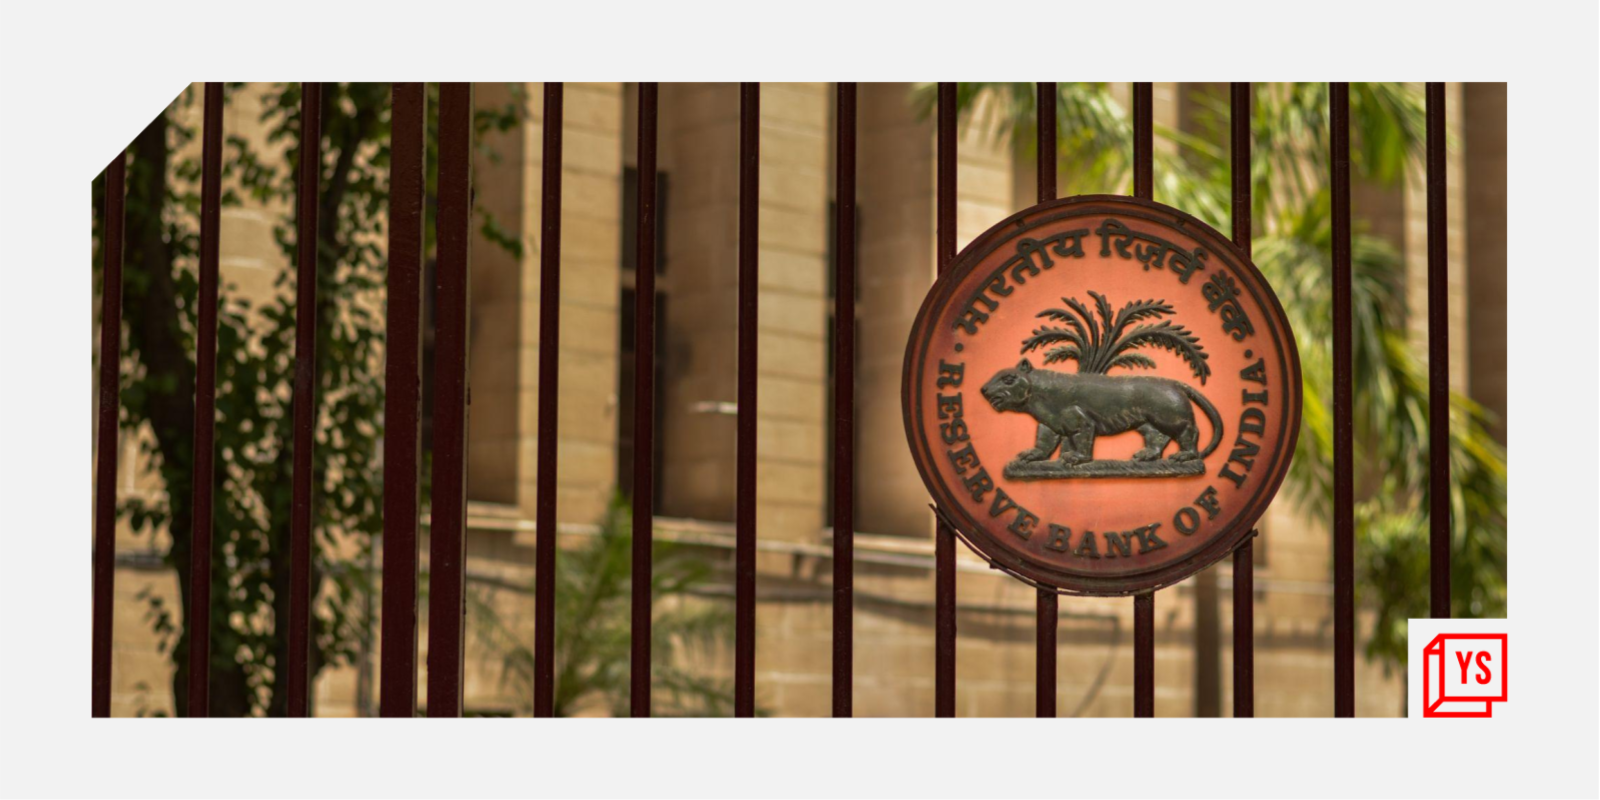 RBI hikes repo rate by 50 basis points

